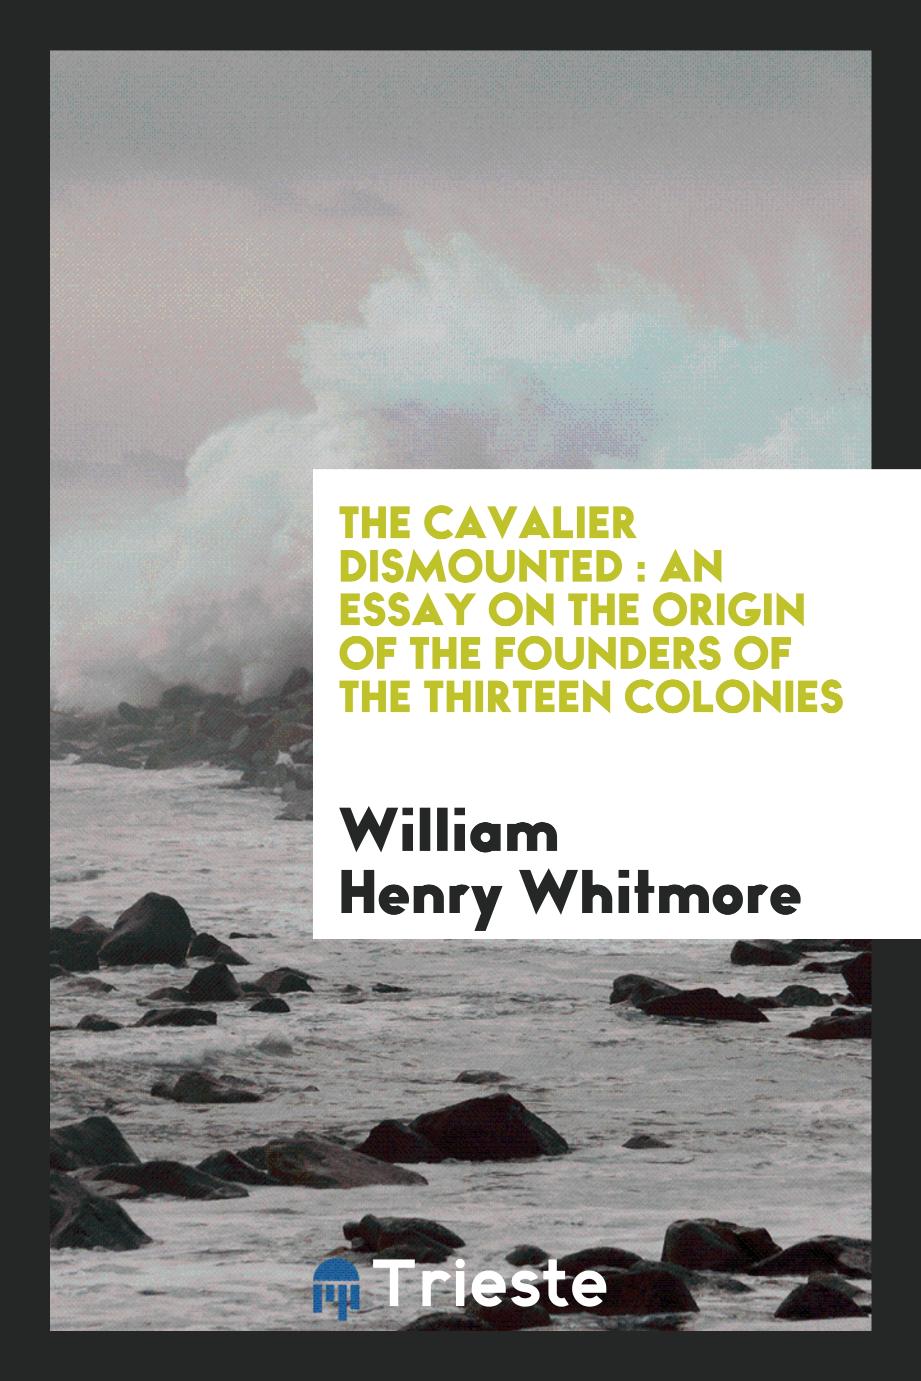 The cavalier dismounted : an essay on the origin of the founders of the thirteen colonies